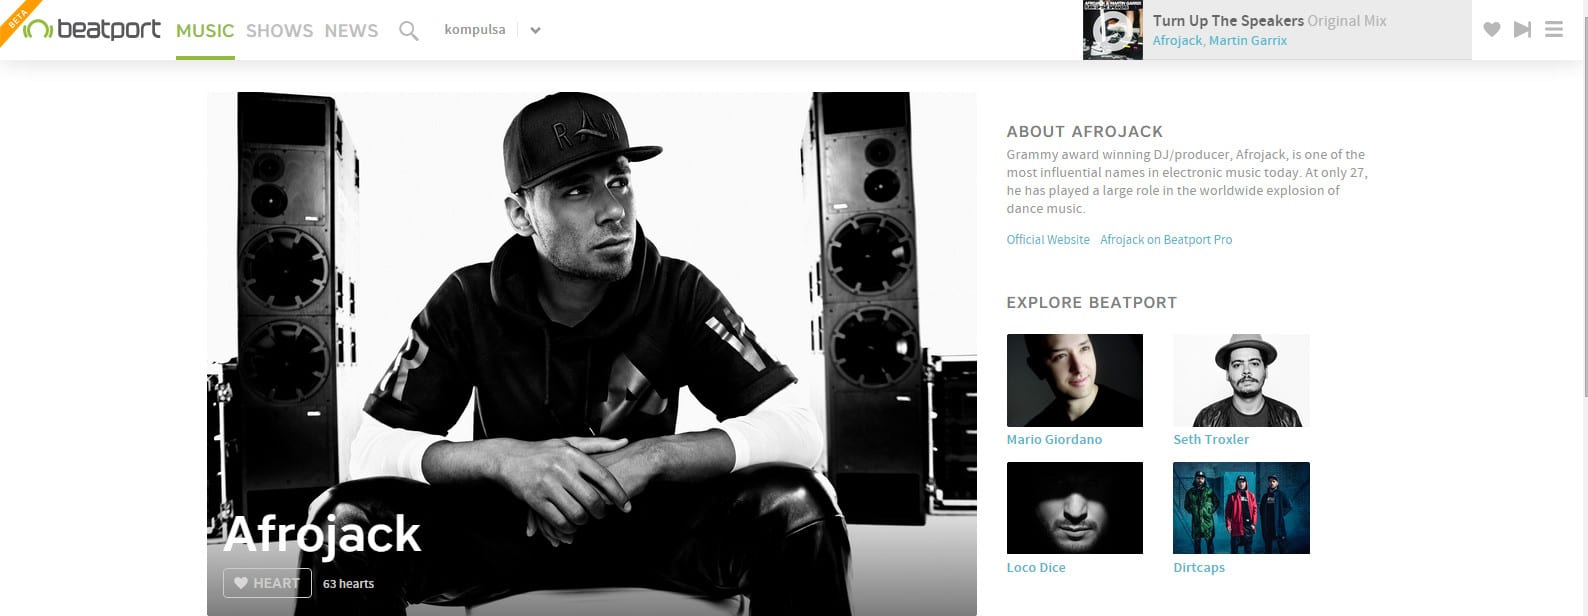 Beatport Streaming Service – Afrojack Artist Page